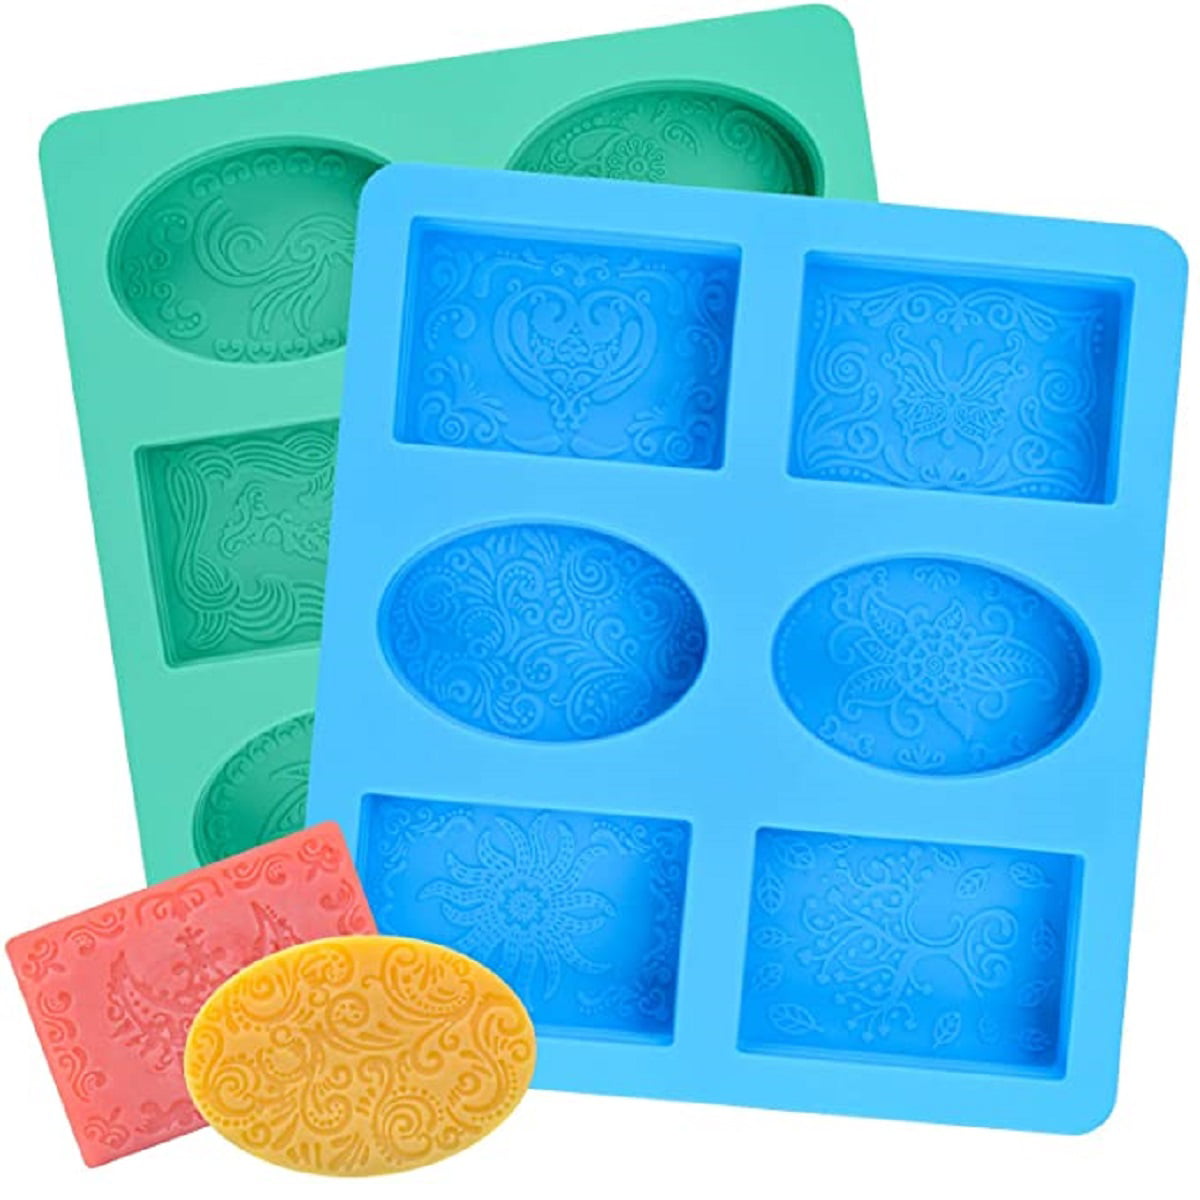 LERYKIN 2 Pack Silicone Soap Molds, 6 Cavities Rectangle Silicone Soap Molds, Great for Homemade Craft Soap Mold, Chocolate Mold, Cake Mold ＆ Ice Cube Tray - Just Pop Out（Blue 